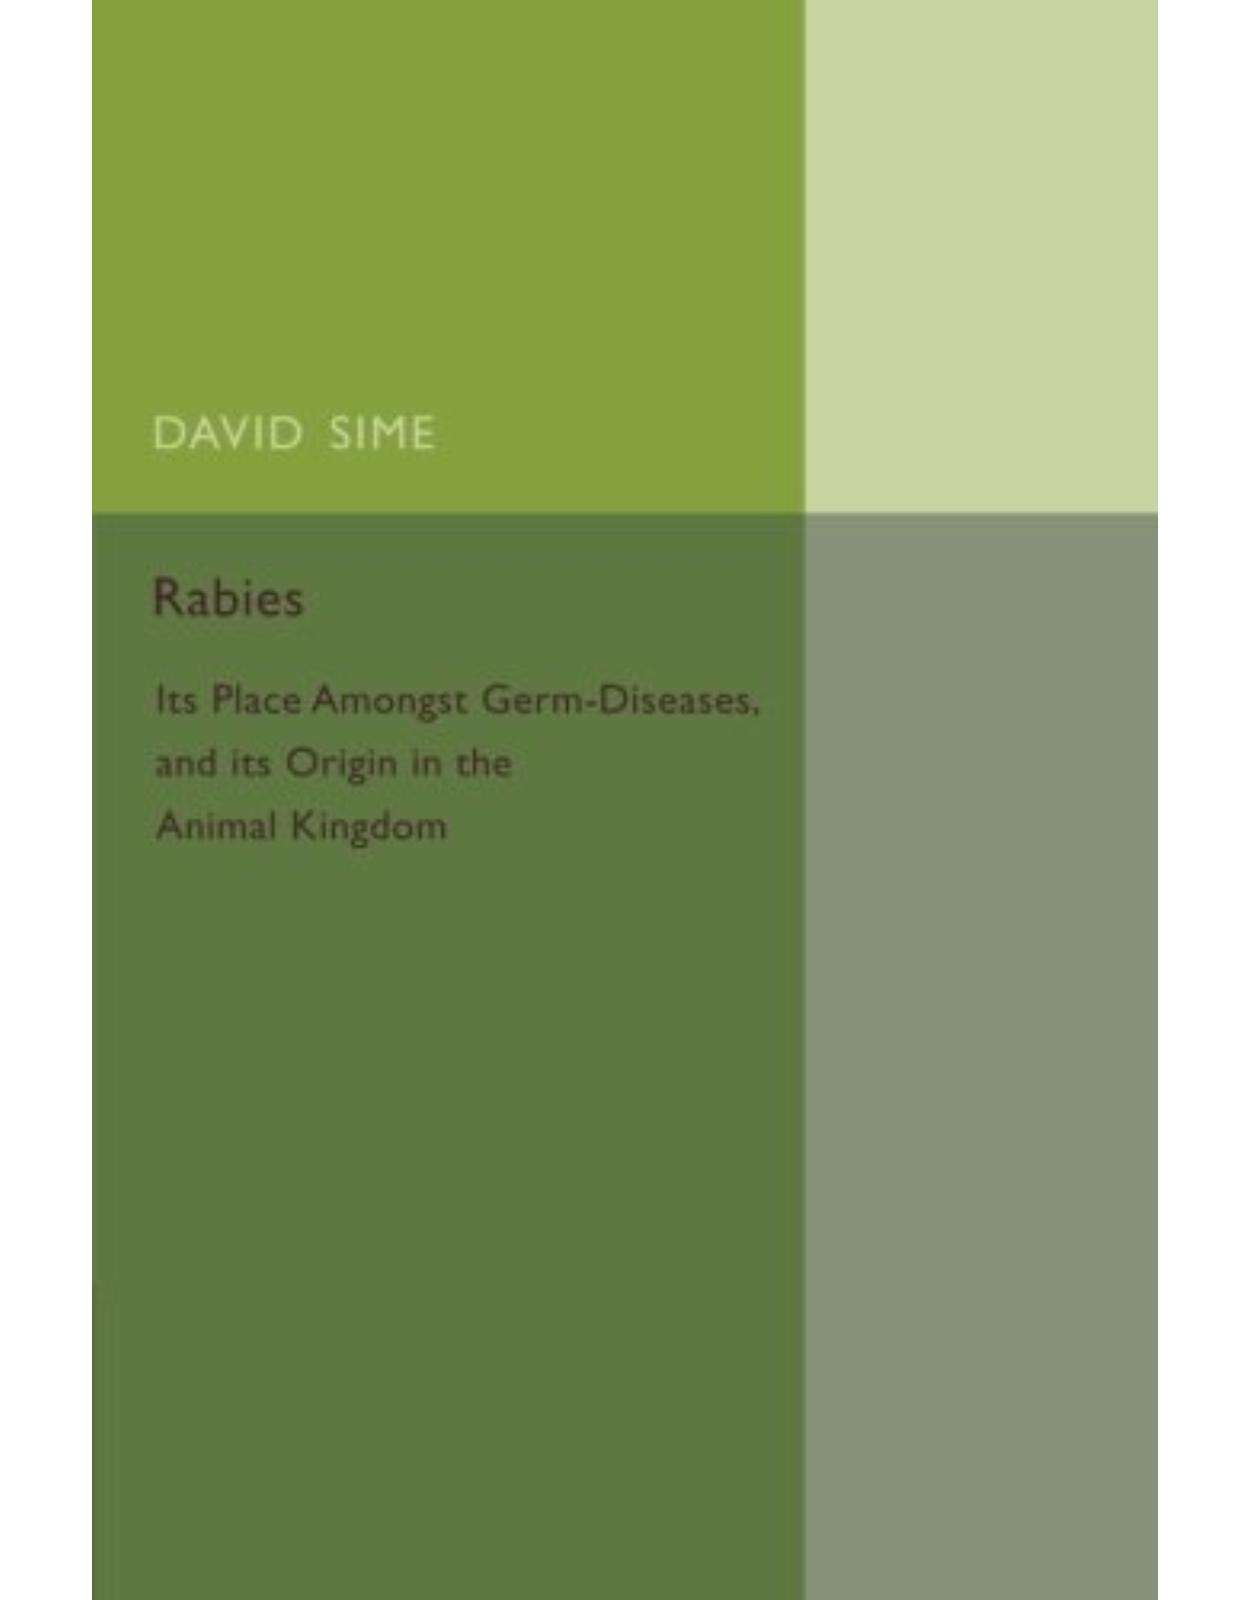 Rabies: Its Place amongst Germ-Diseases and its Origin in the Animal Kingdom